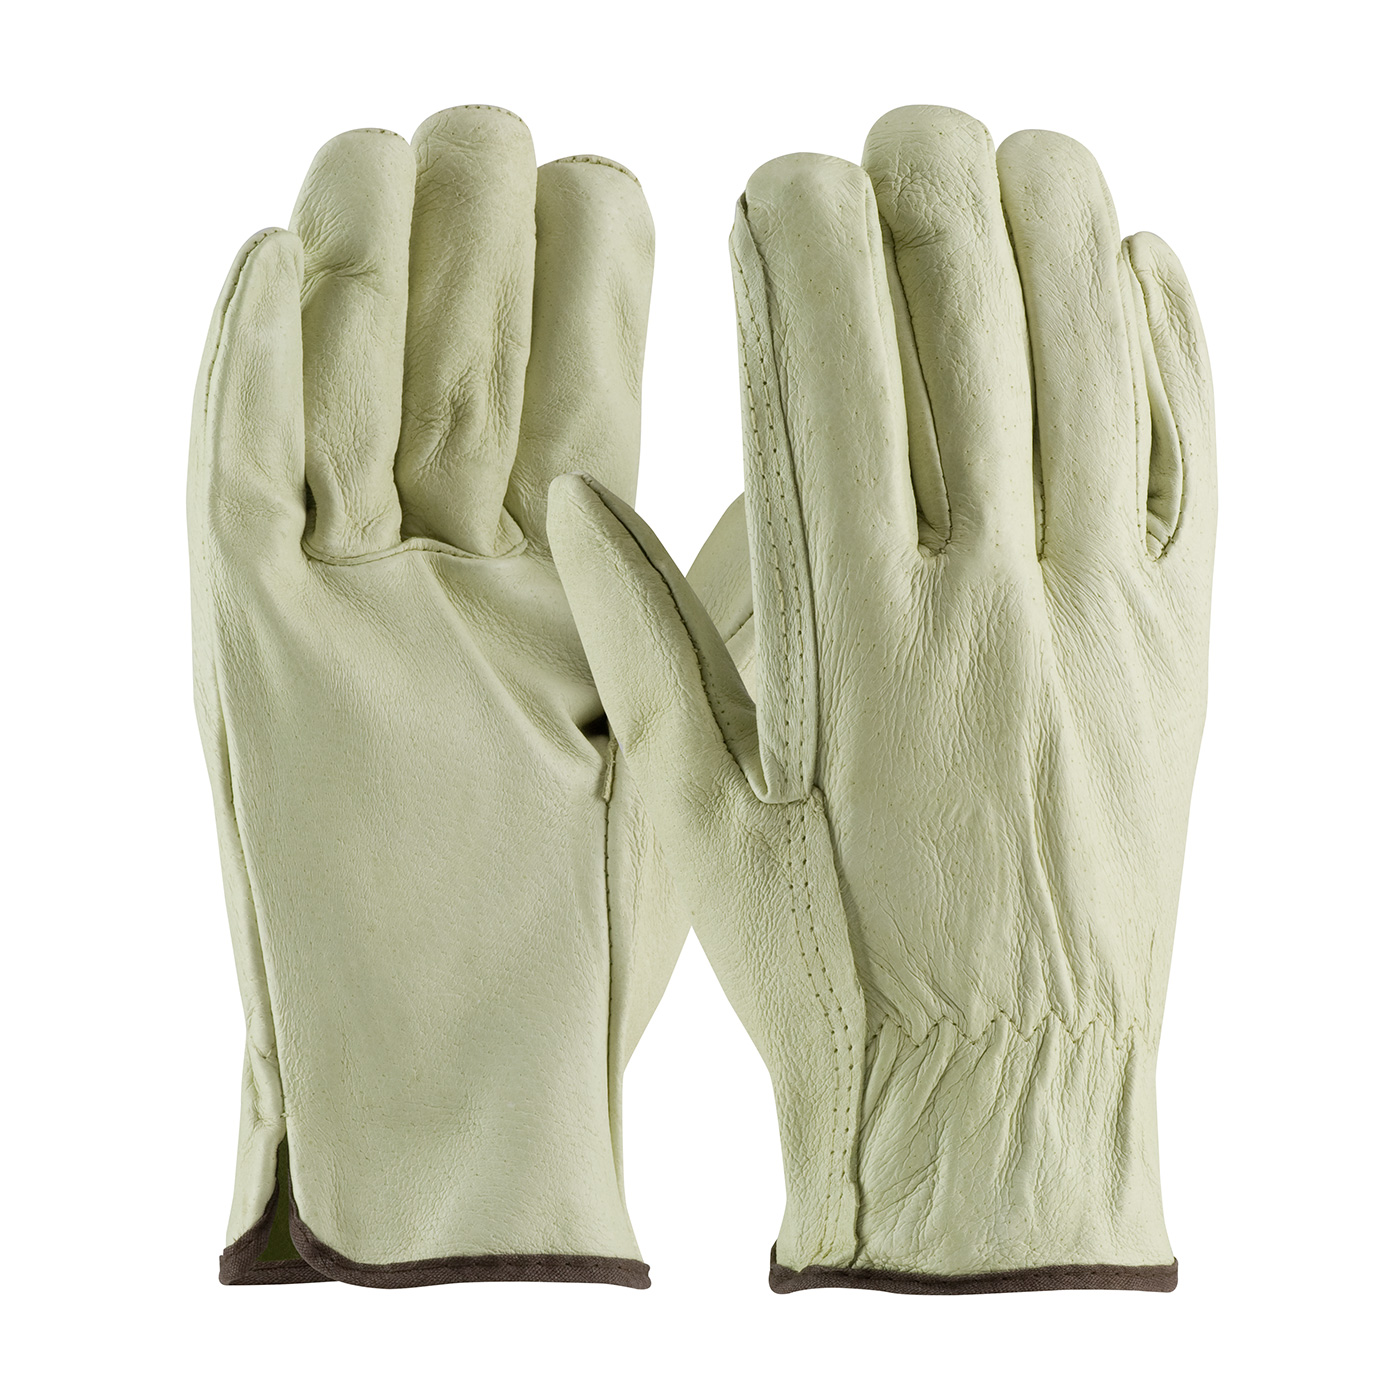 PIP 70-300/XL Industry Grade Top Grain Pigskin Leather Drivers Glove - Straight Thumb - X-Large PID-70-300 XL